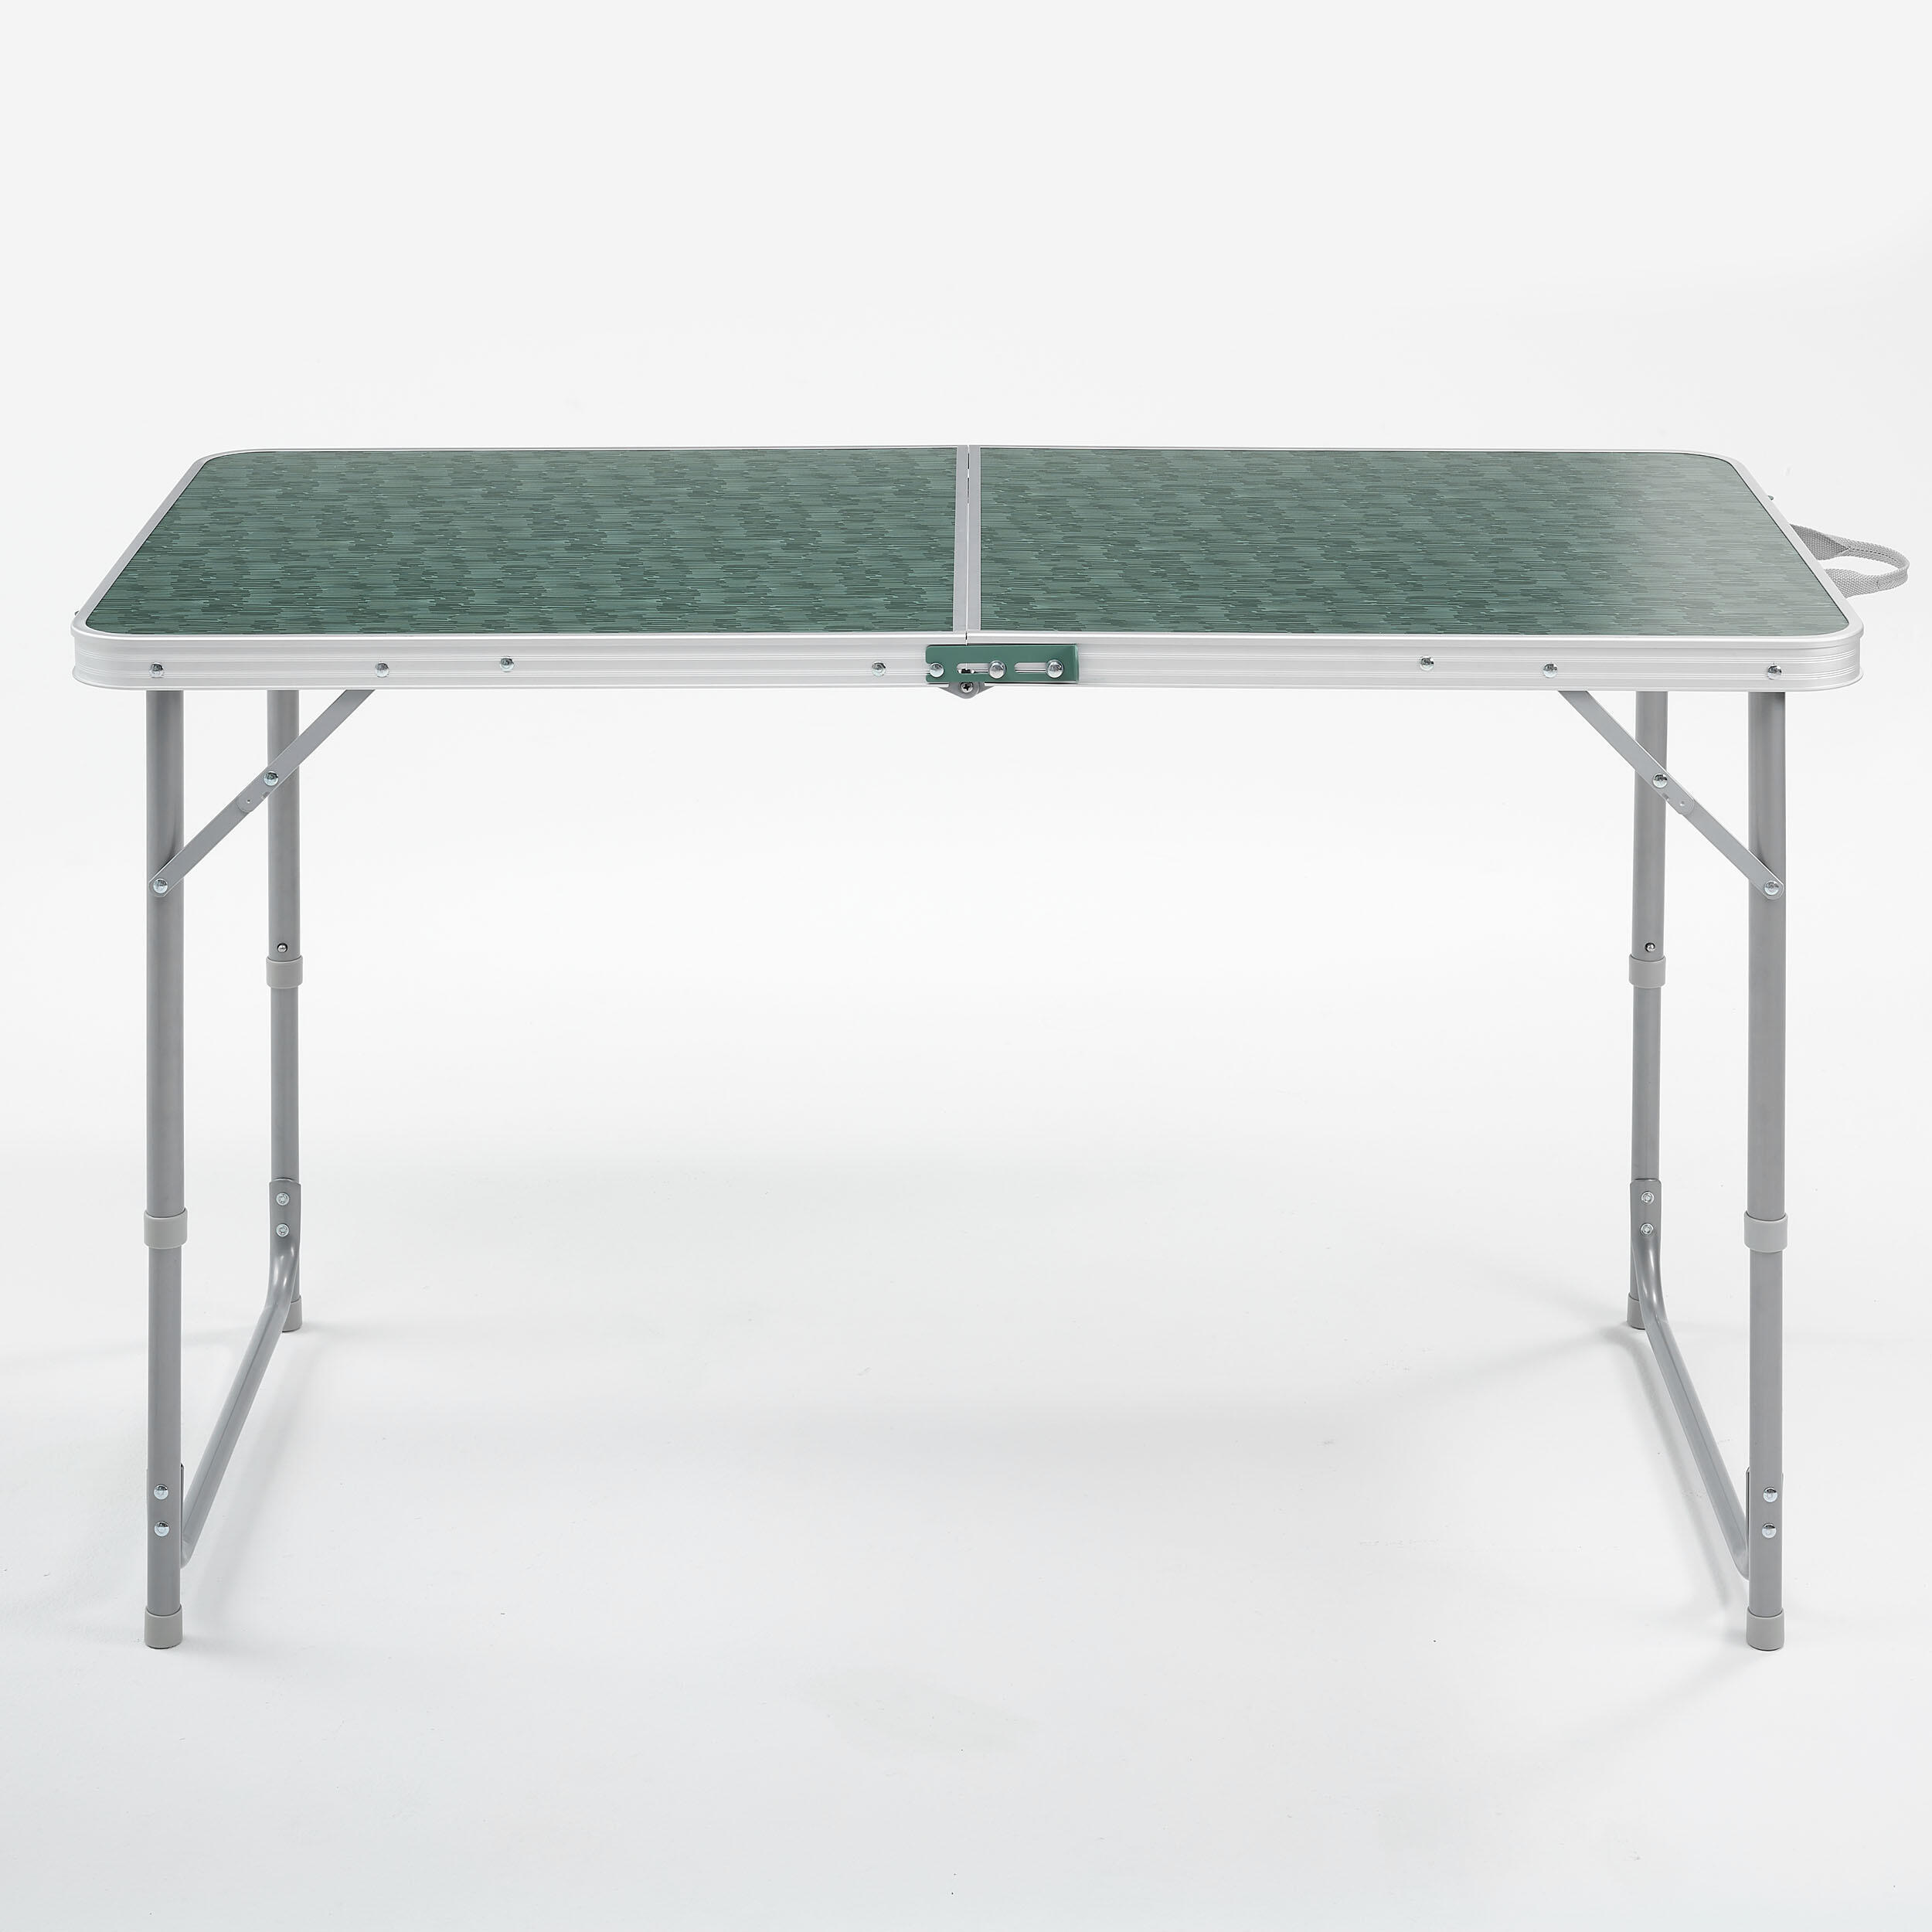 FOLDING CAMPING TABLE - 4 TO 6 PEOPLE 4/10